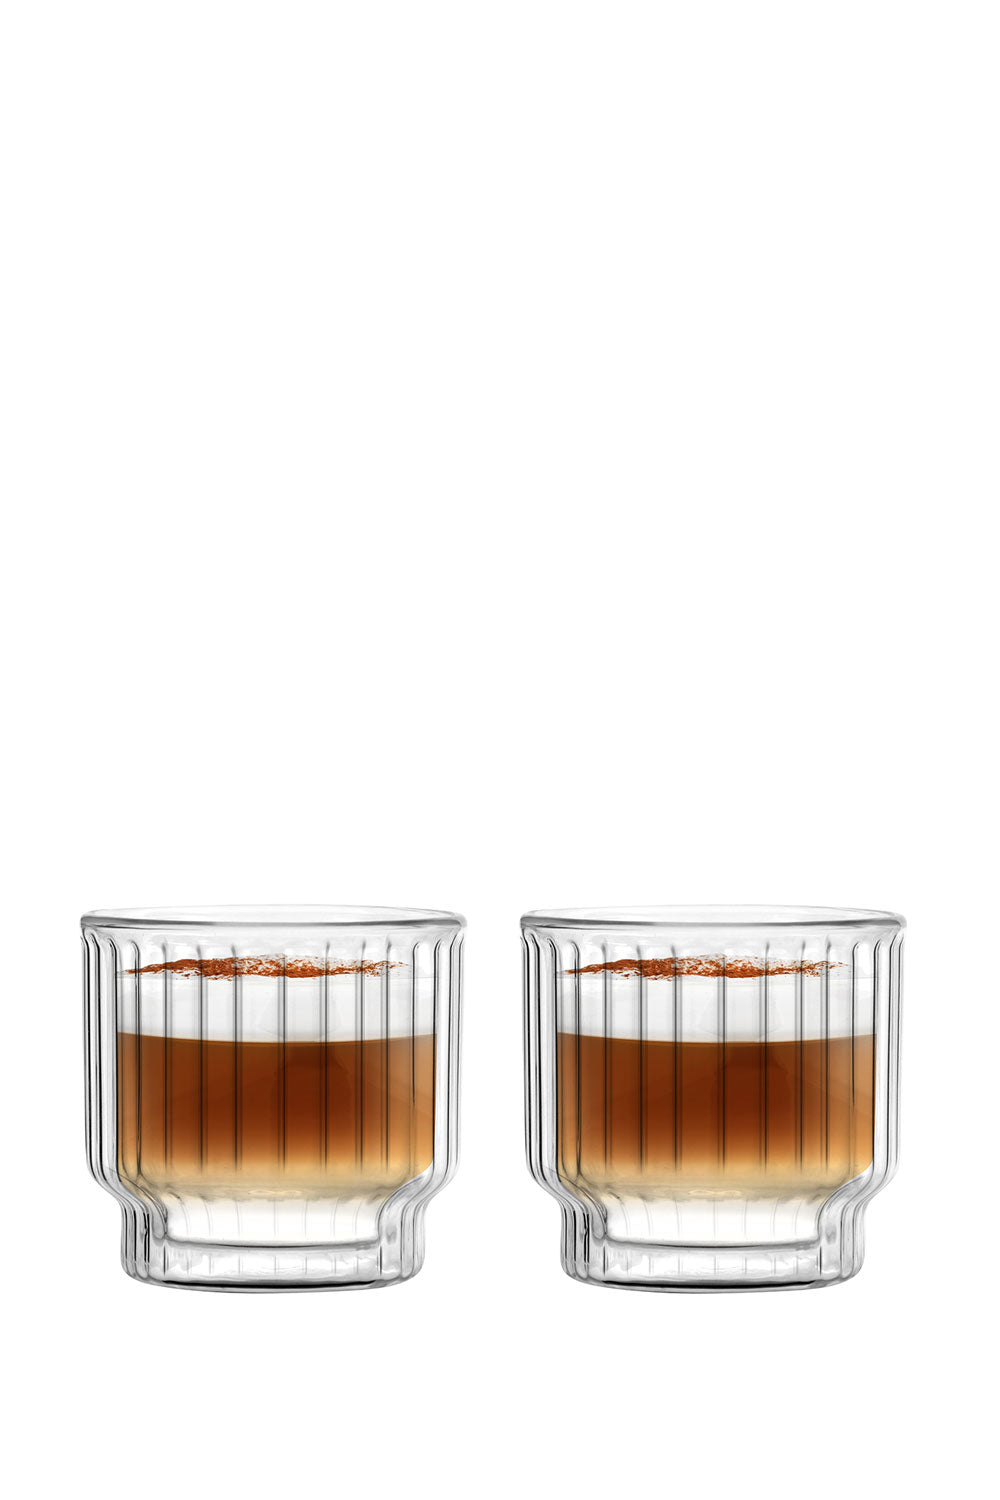 Lungo Double Wall Glasses 300 ml, Set of 2